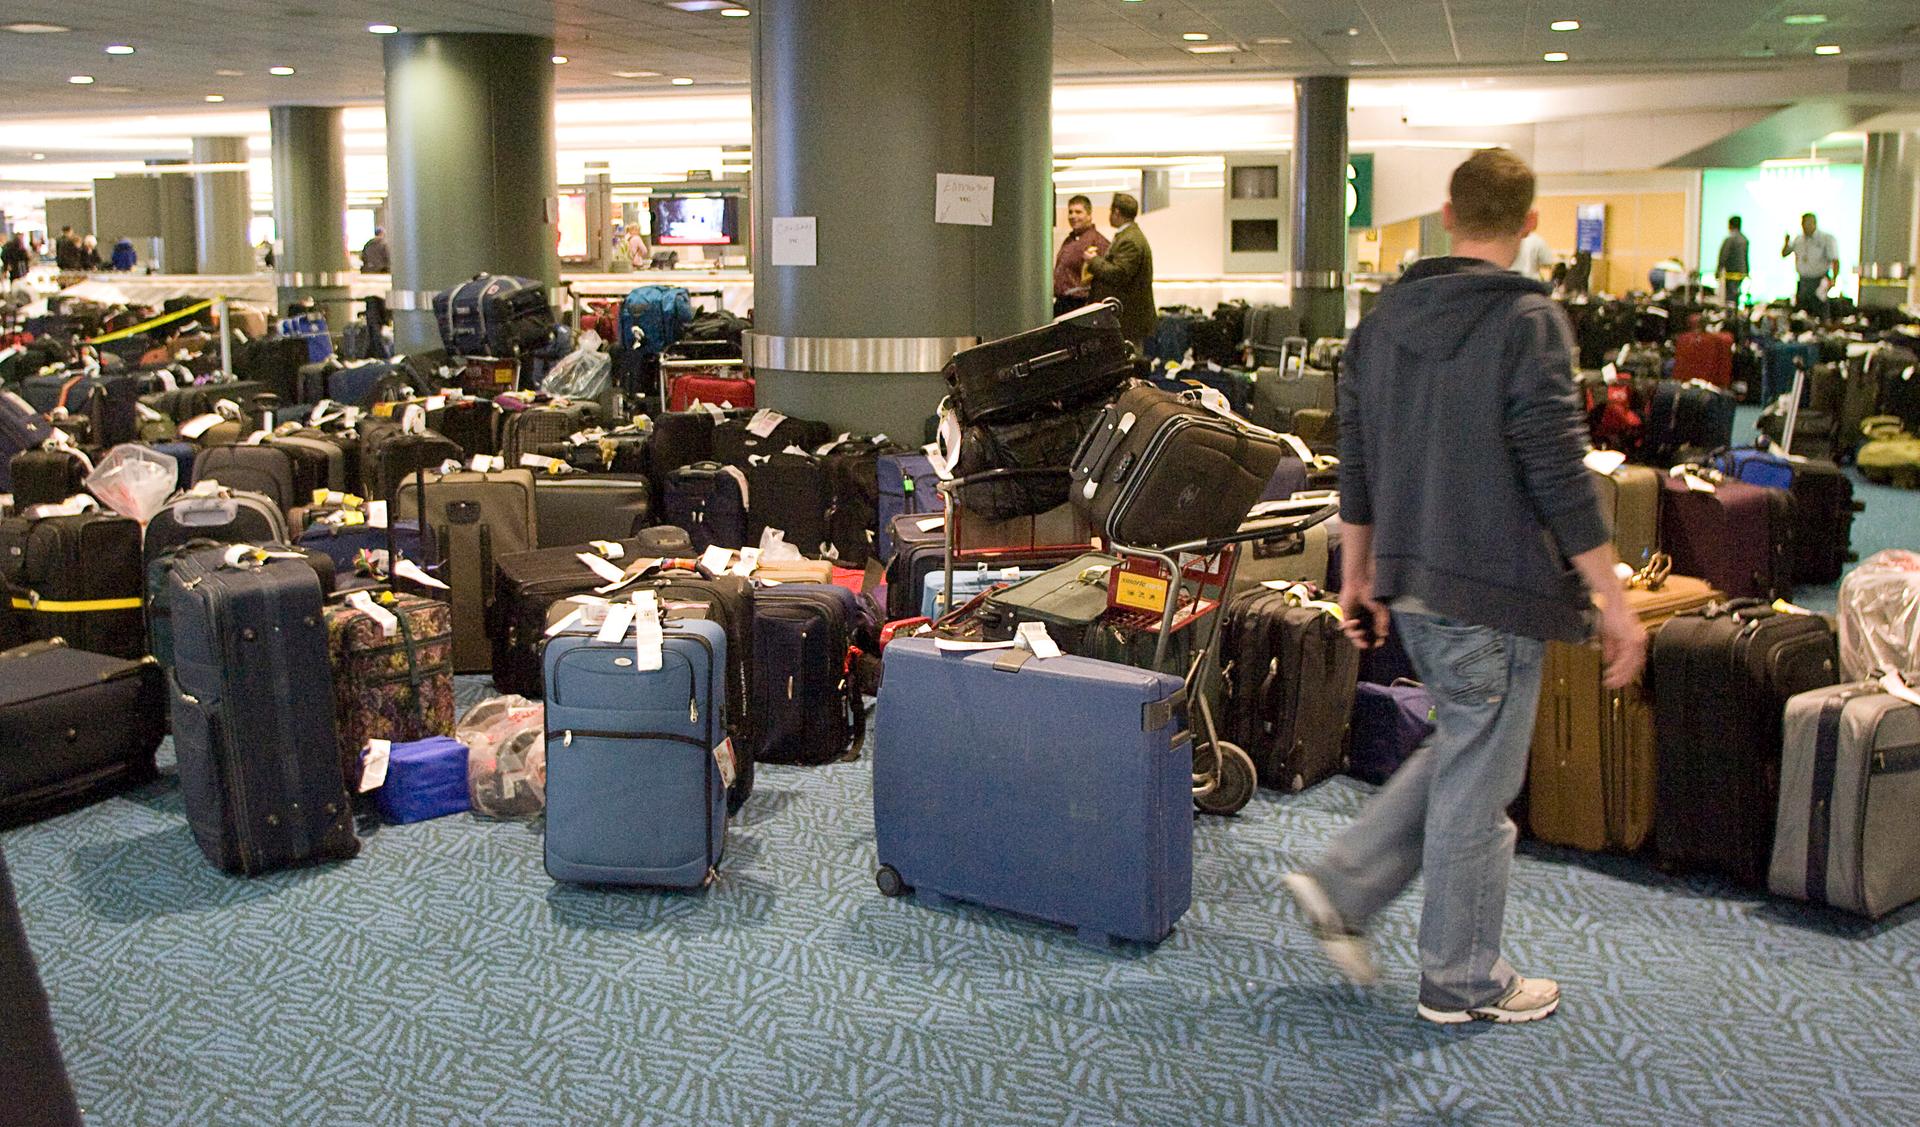 A passenger looks for his displaced or lost luggage at the international airport in Vancouver, British Columbia.